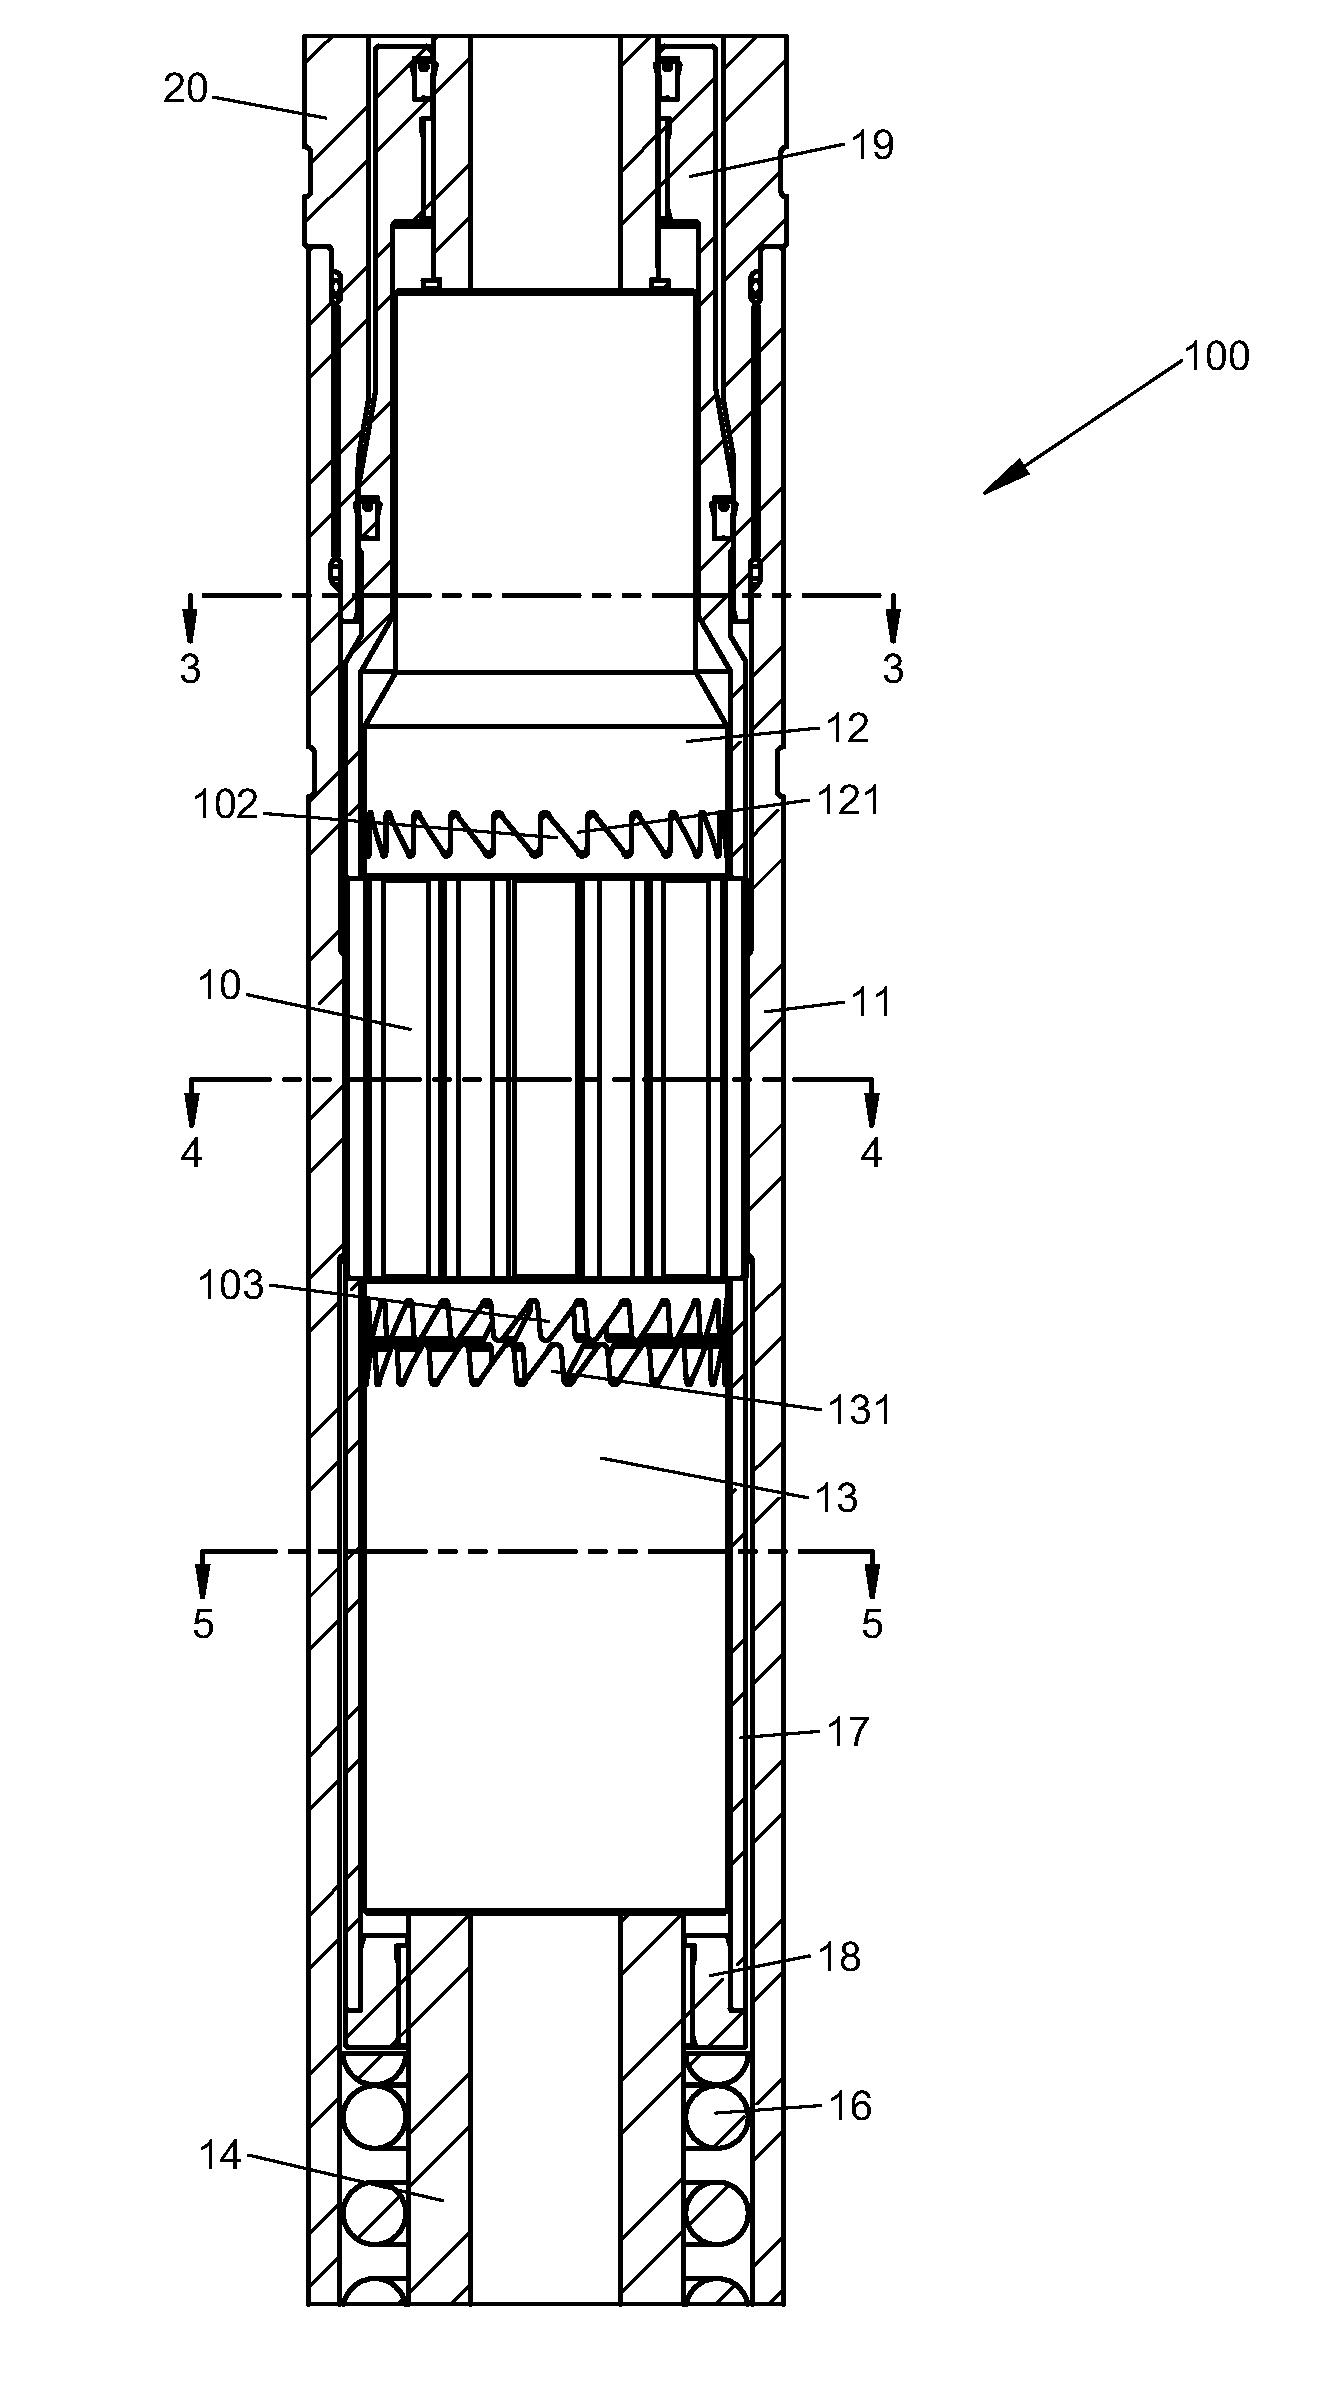 Mechanism for providing controllable angular orientation while transmitting torsional load